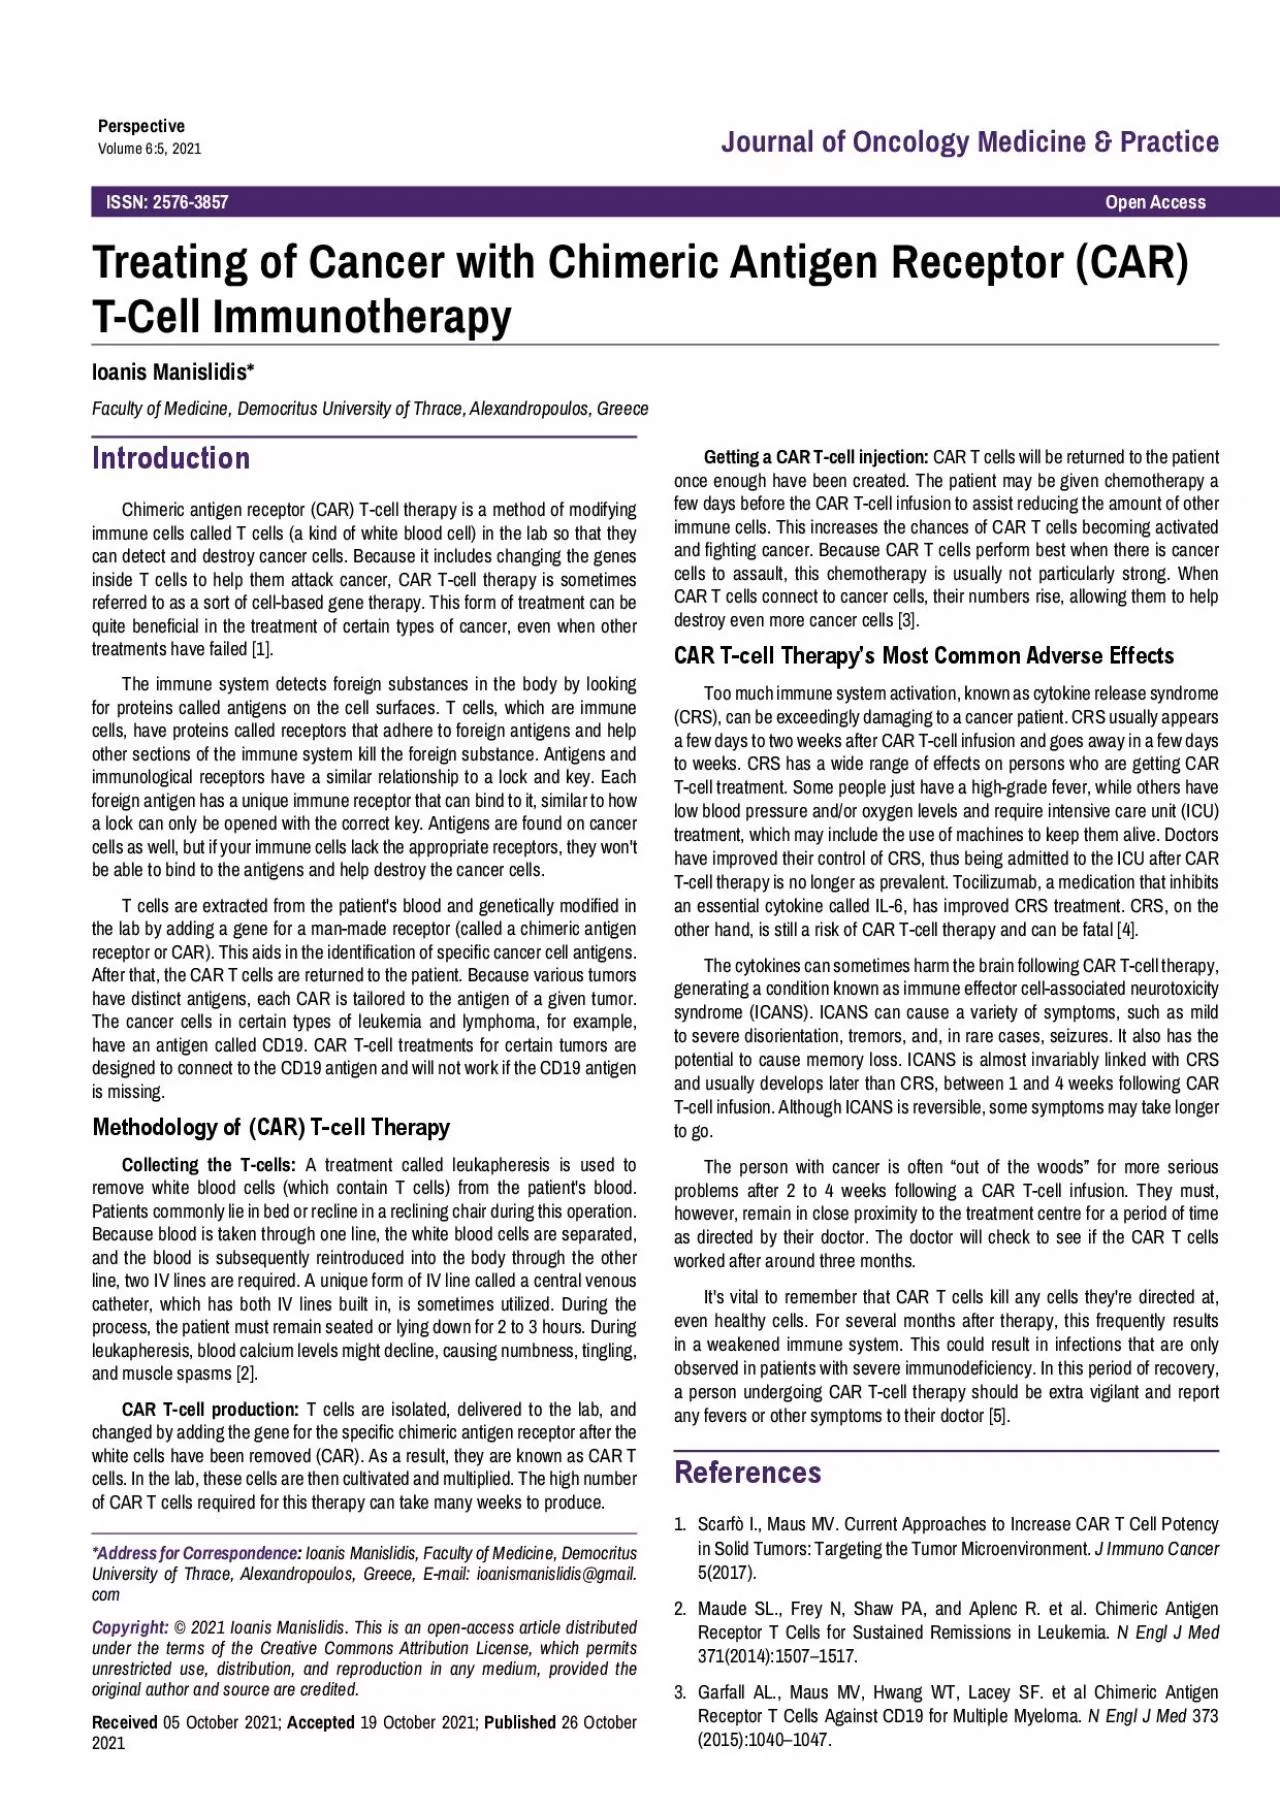 Treating of Cancer with Chimeric Antigen Receptor CAR TCell Immunot